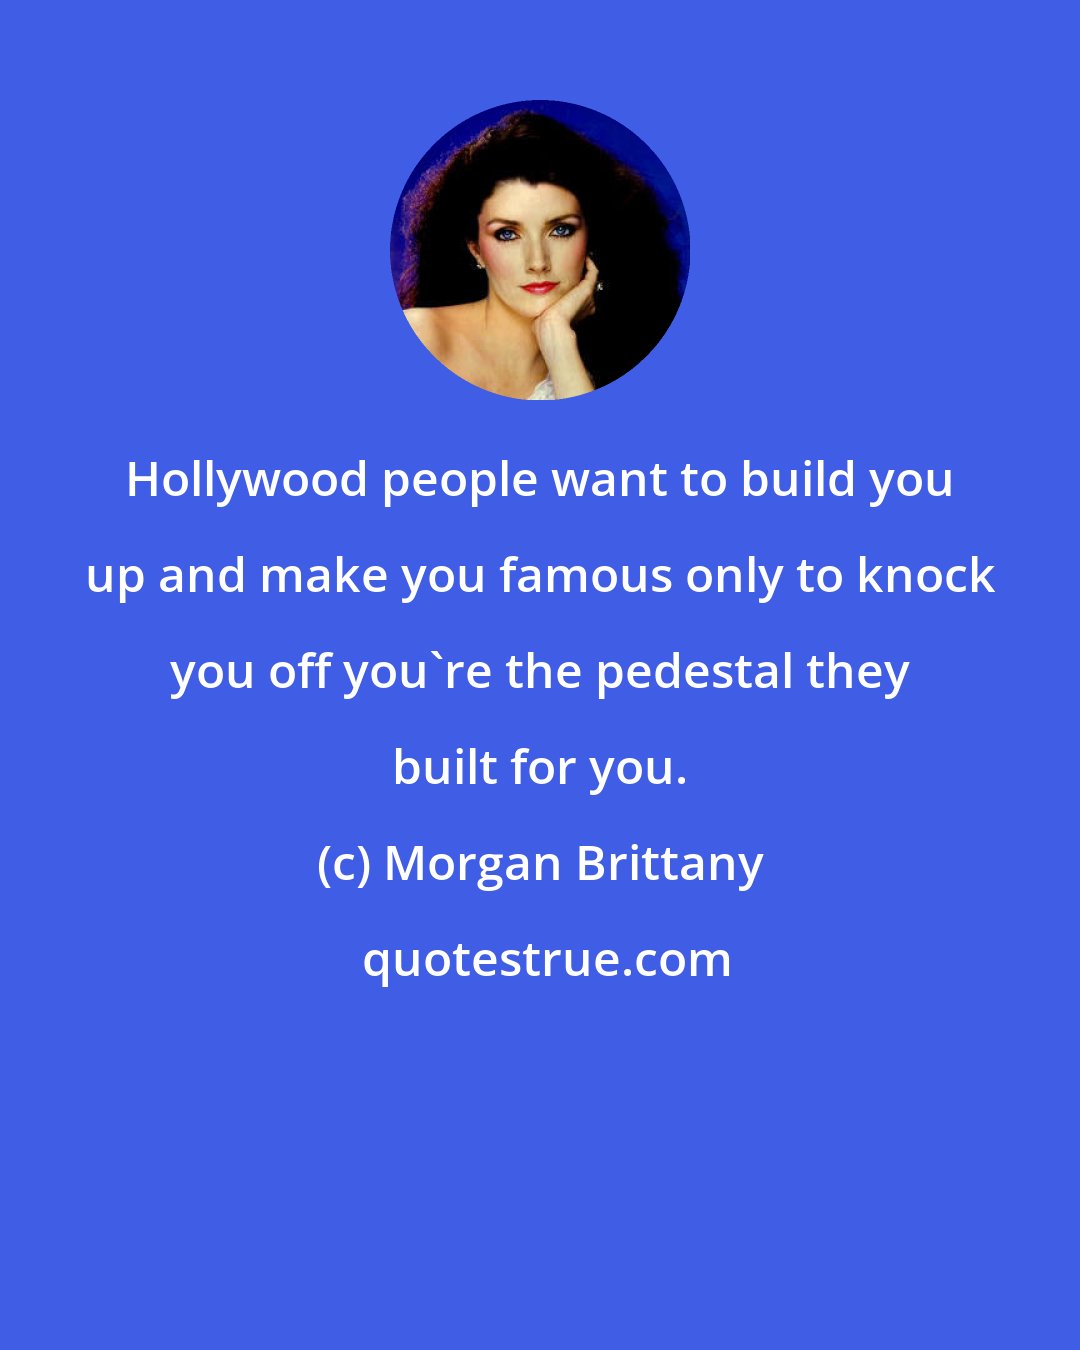 Morgan Brittany: Hollywood people want to build you up and make you famous only to knock you off you're the pedestal they built for you.